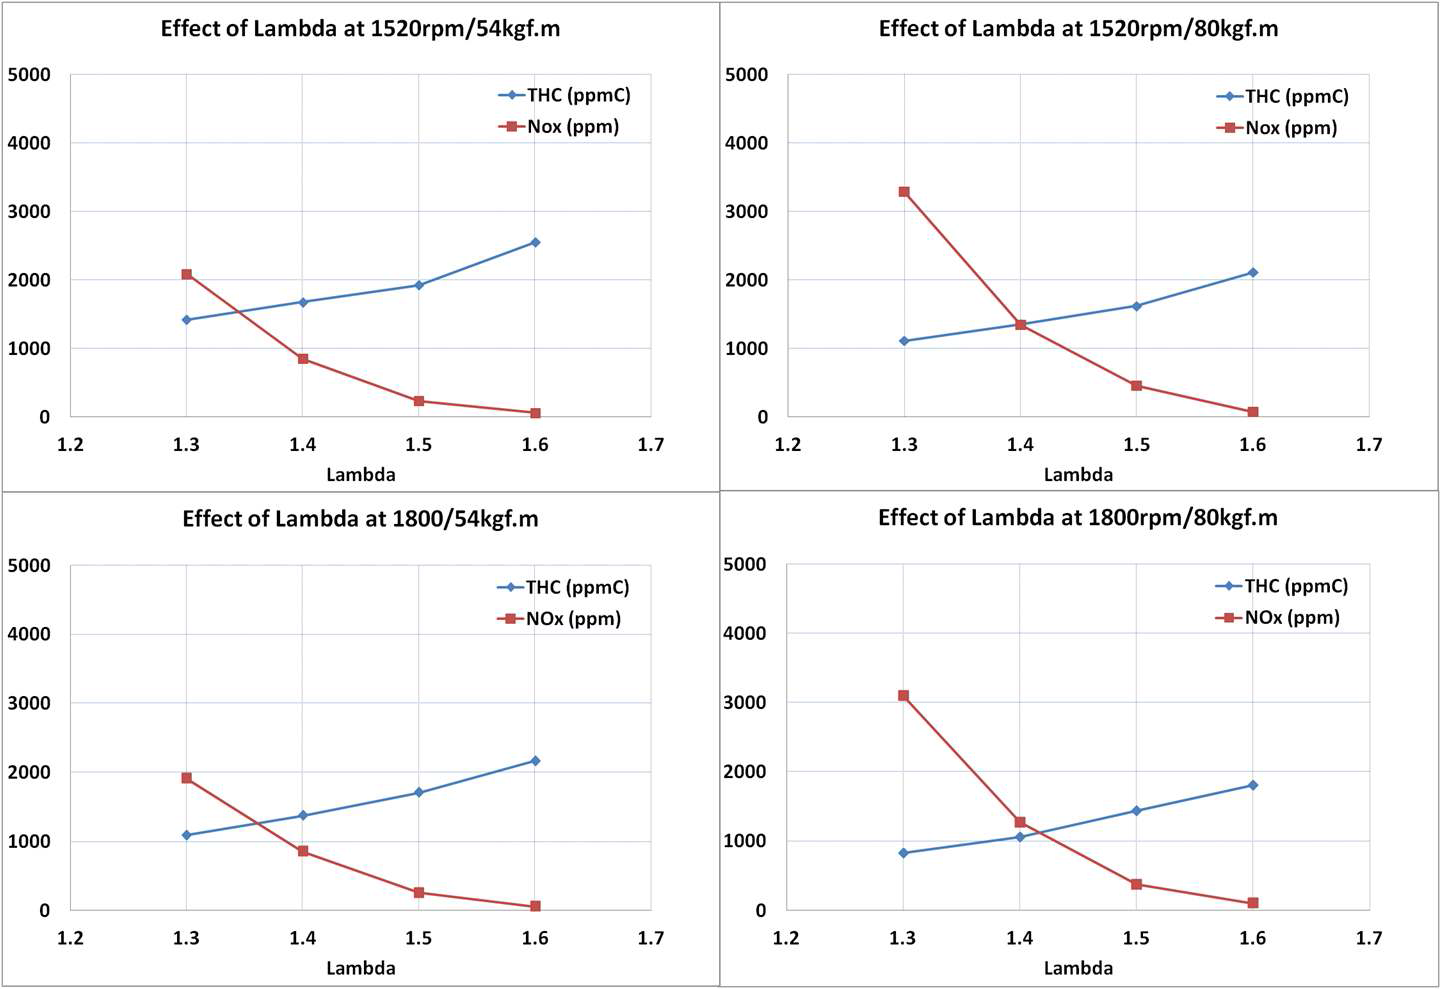 The calculation result of lambda effect